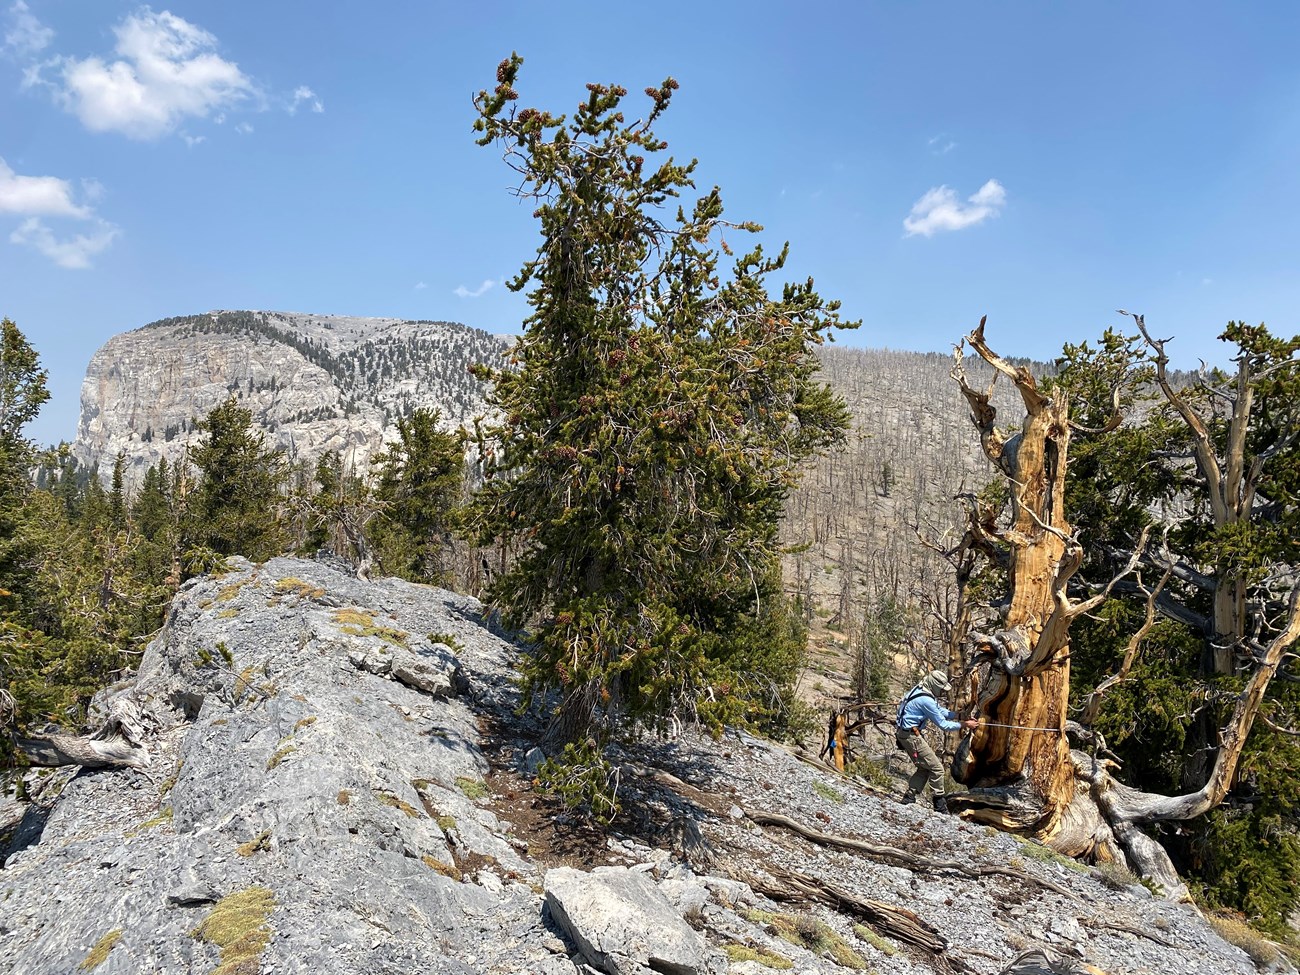 Scientist measuring the diameter of a dead bristlecone pine on a rocky ridge and view of bristlecone forest in background with many trees killed from a fire.